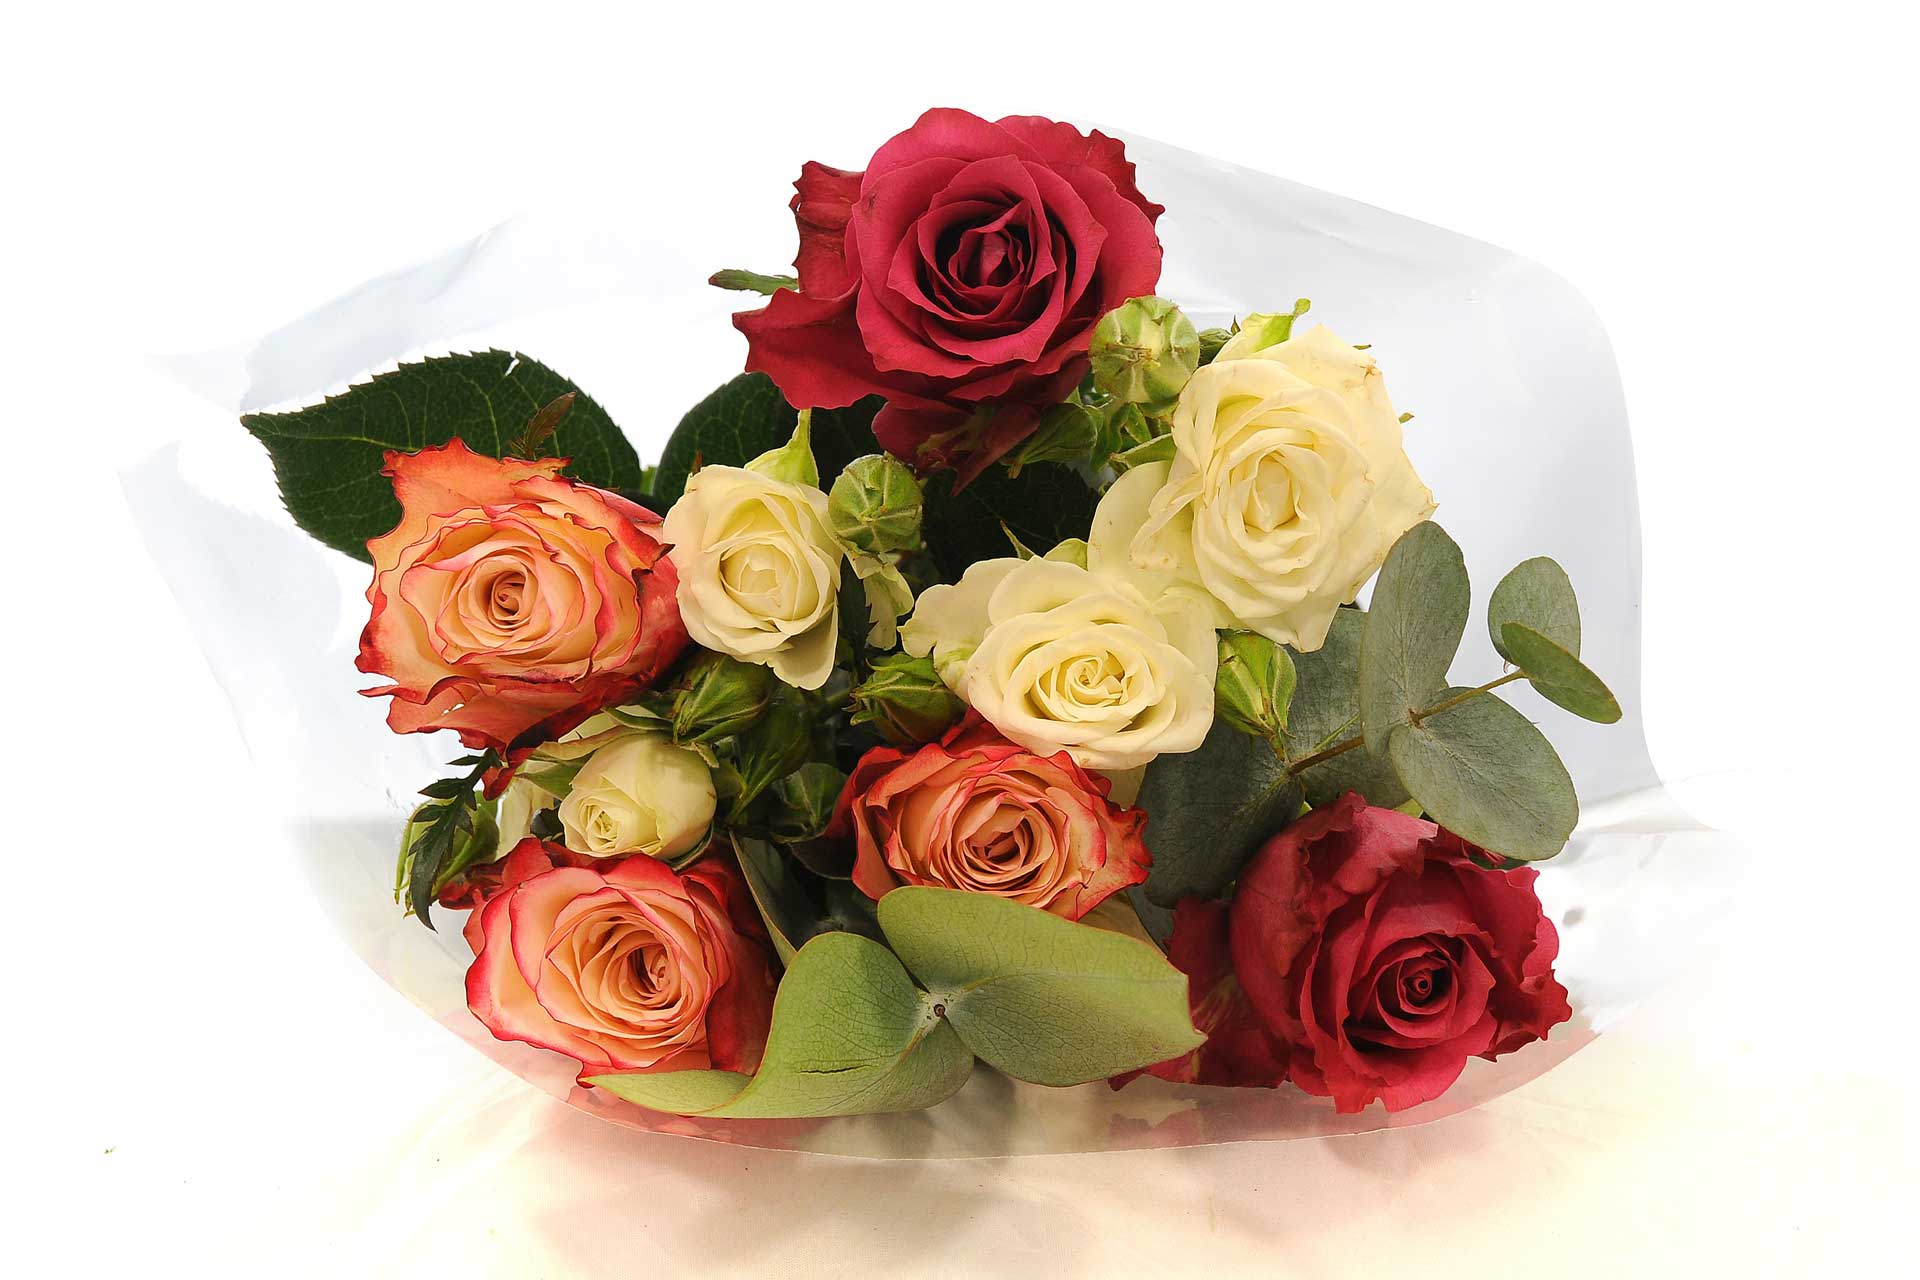 Christmas bouquet with roses